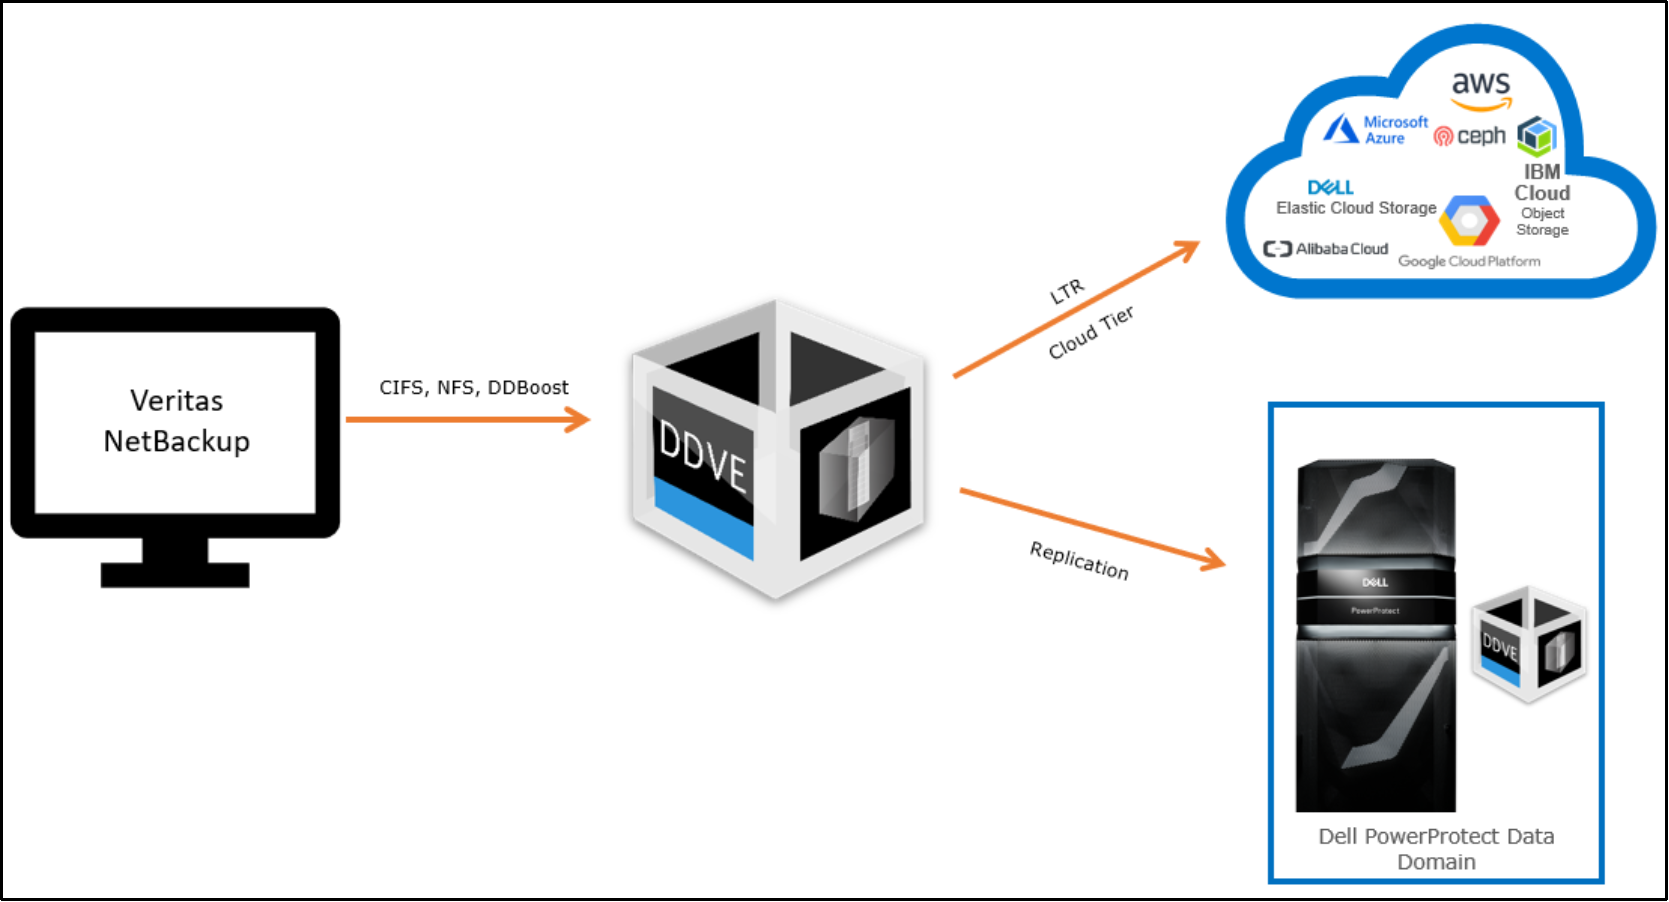 This image shows the NetBackup integration with DDVE